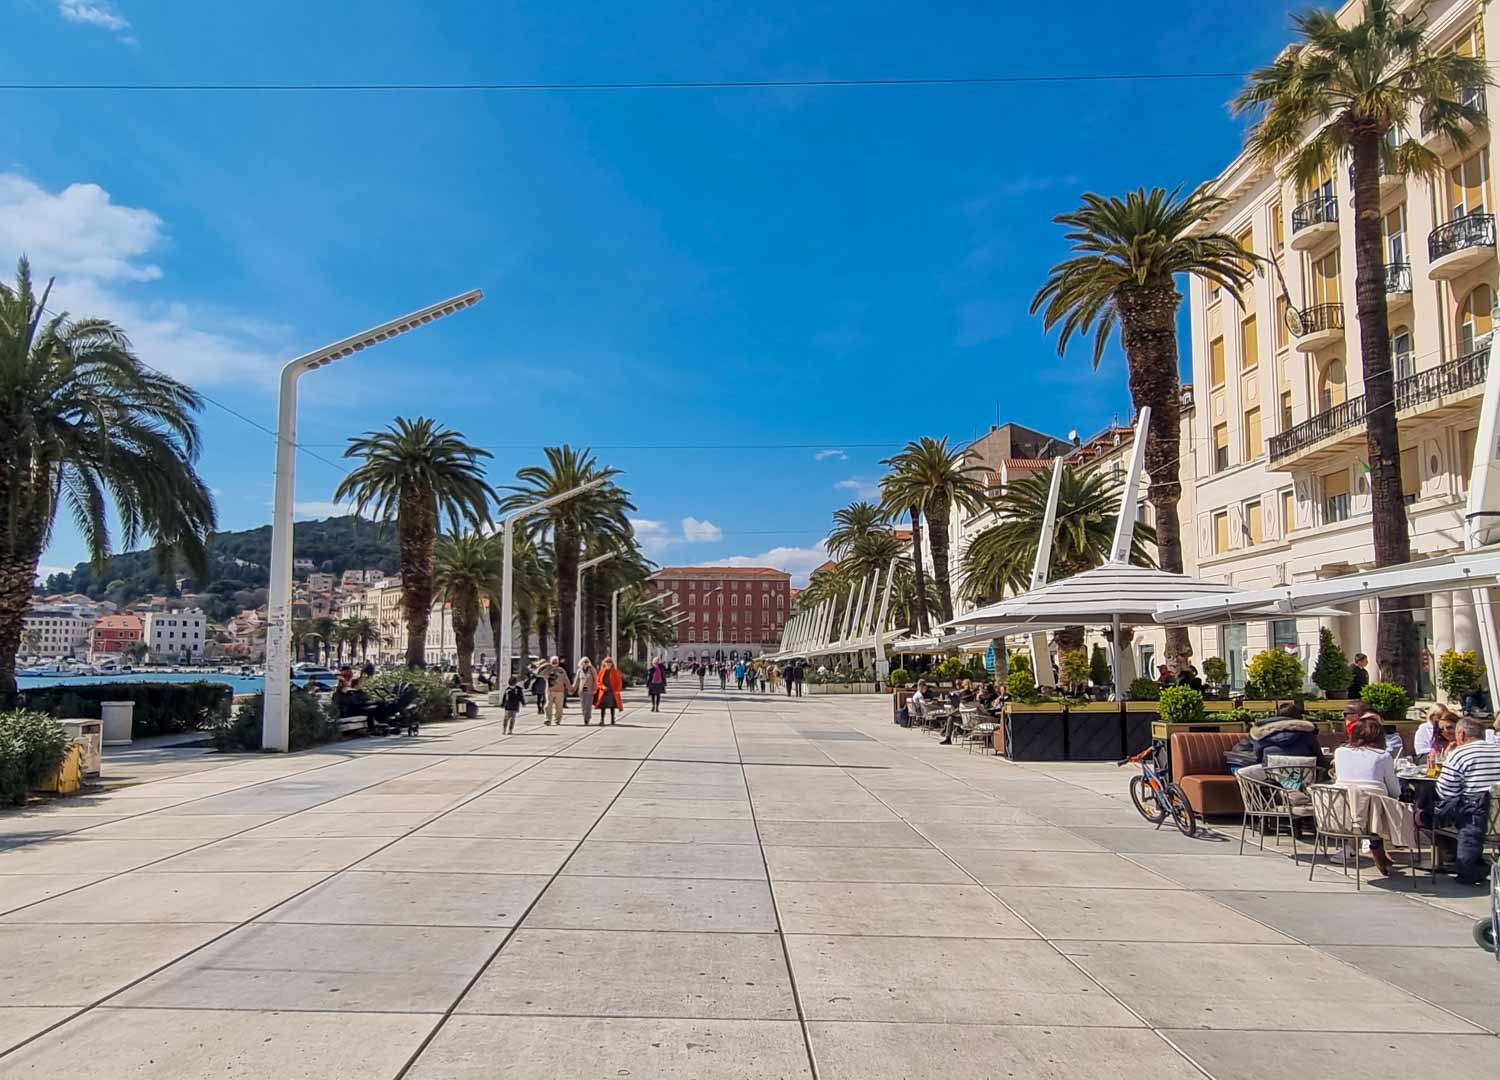 View along the Riva waterfront promenade lined with palm trees and cafes - a walk here is one of the best things to do in Split with kids